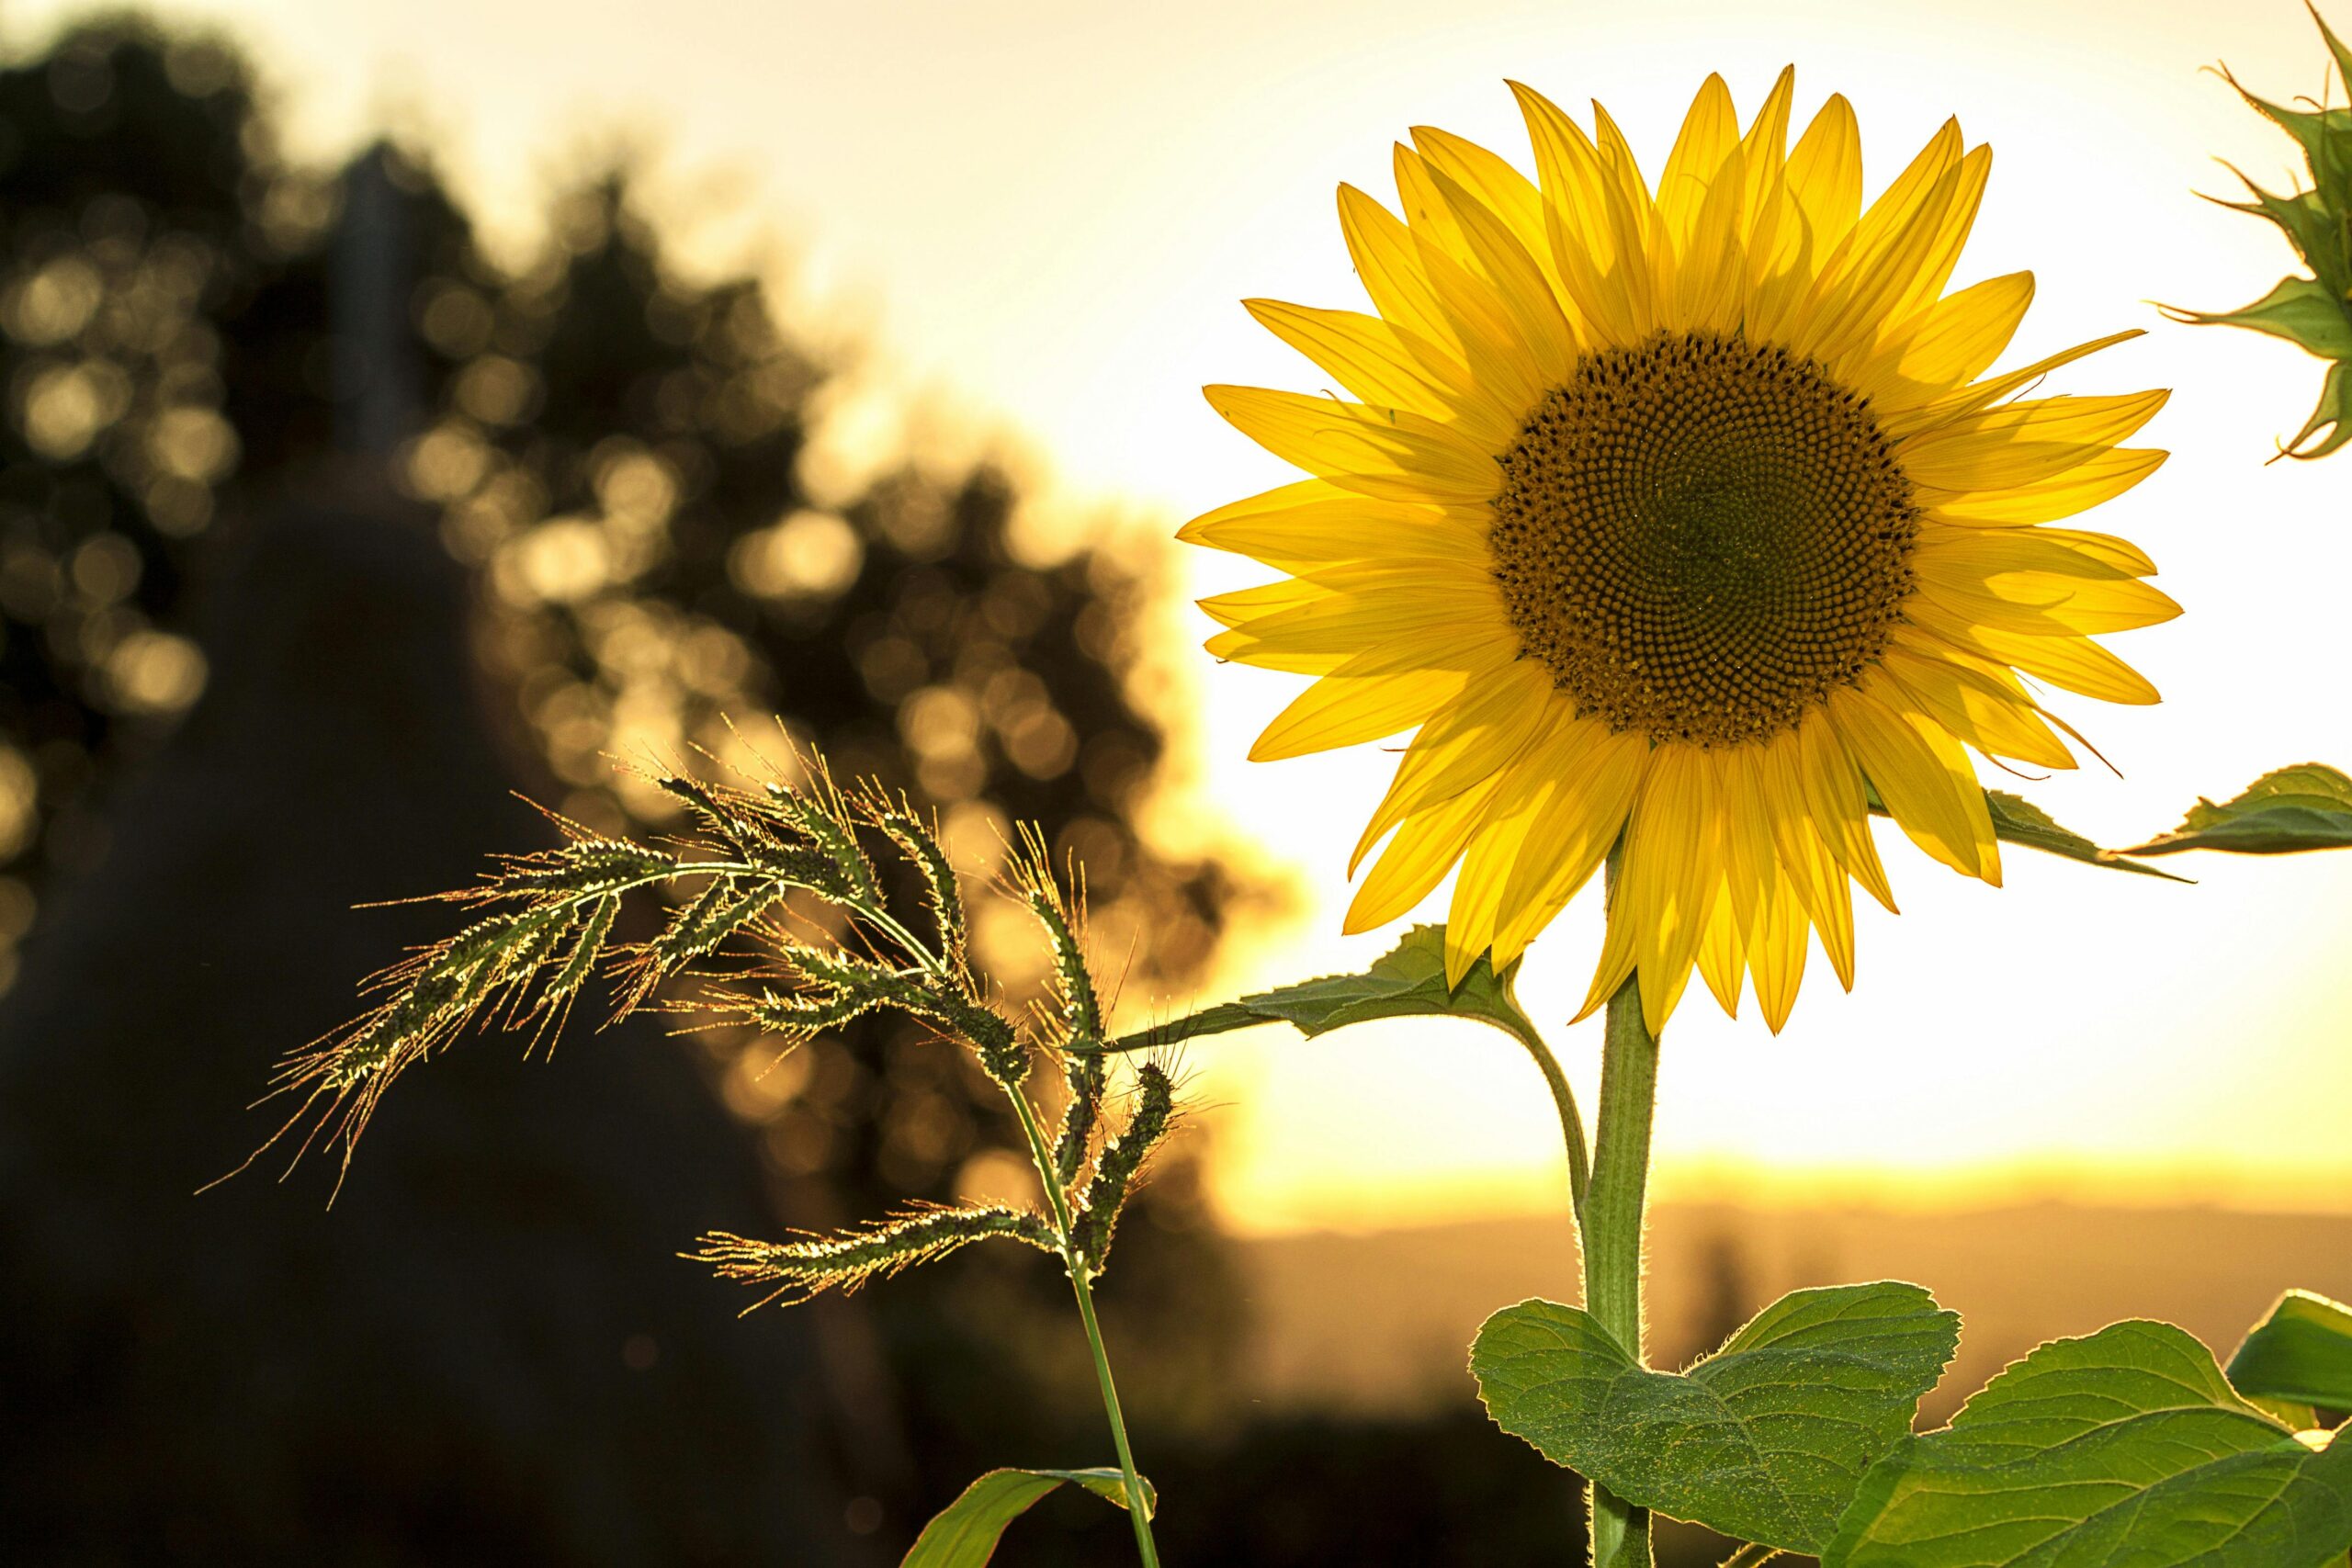 A photo of a large sunflower.